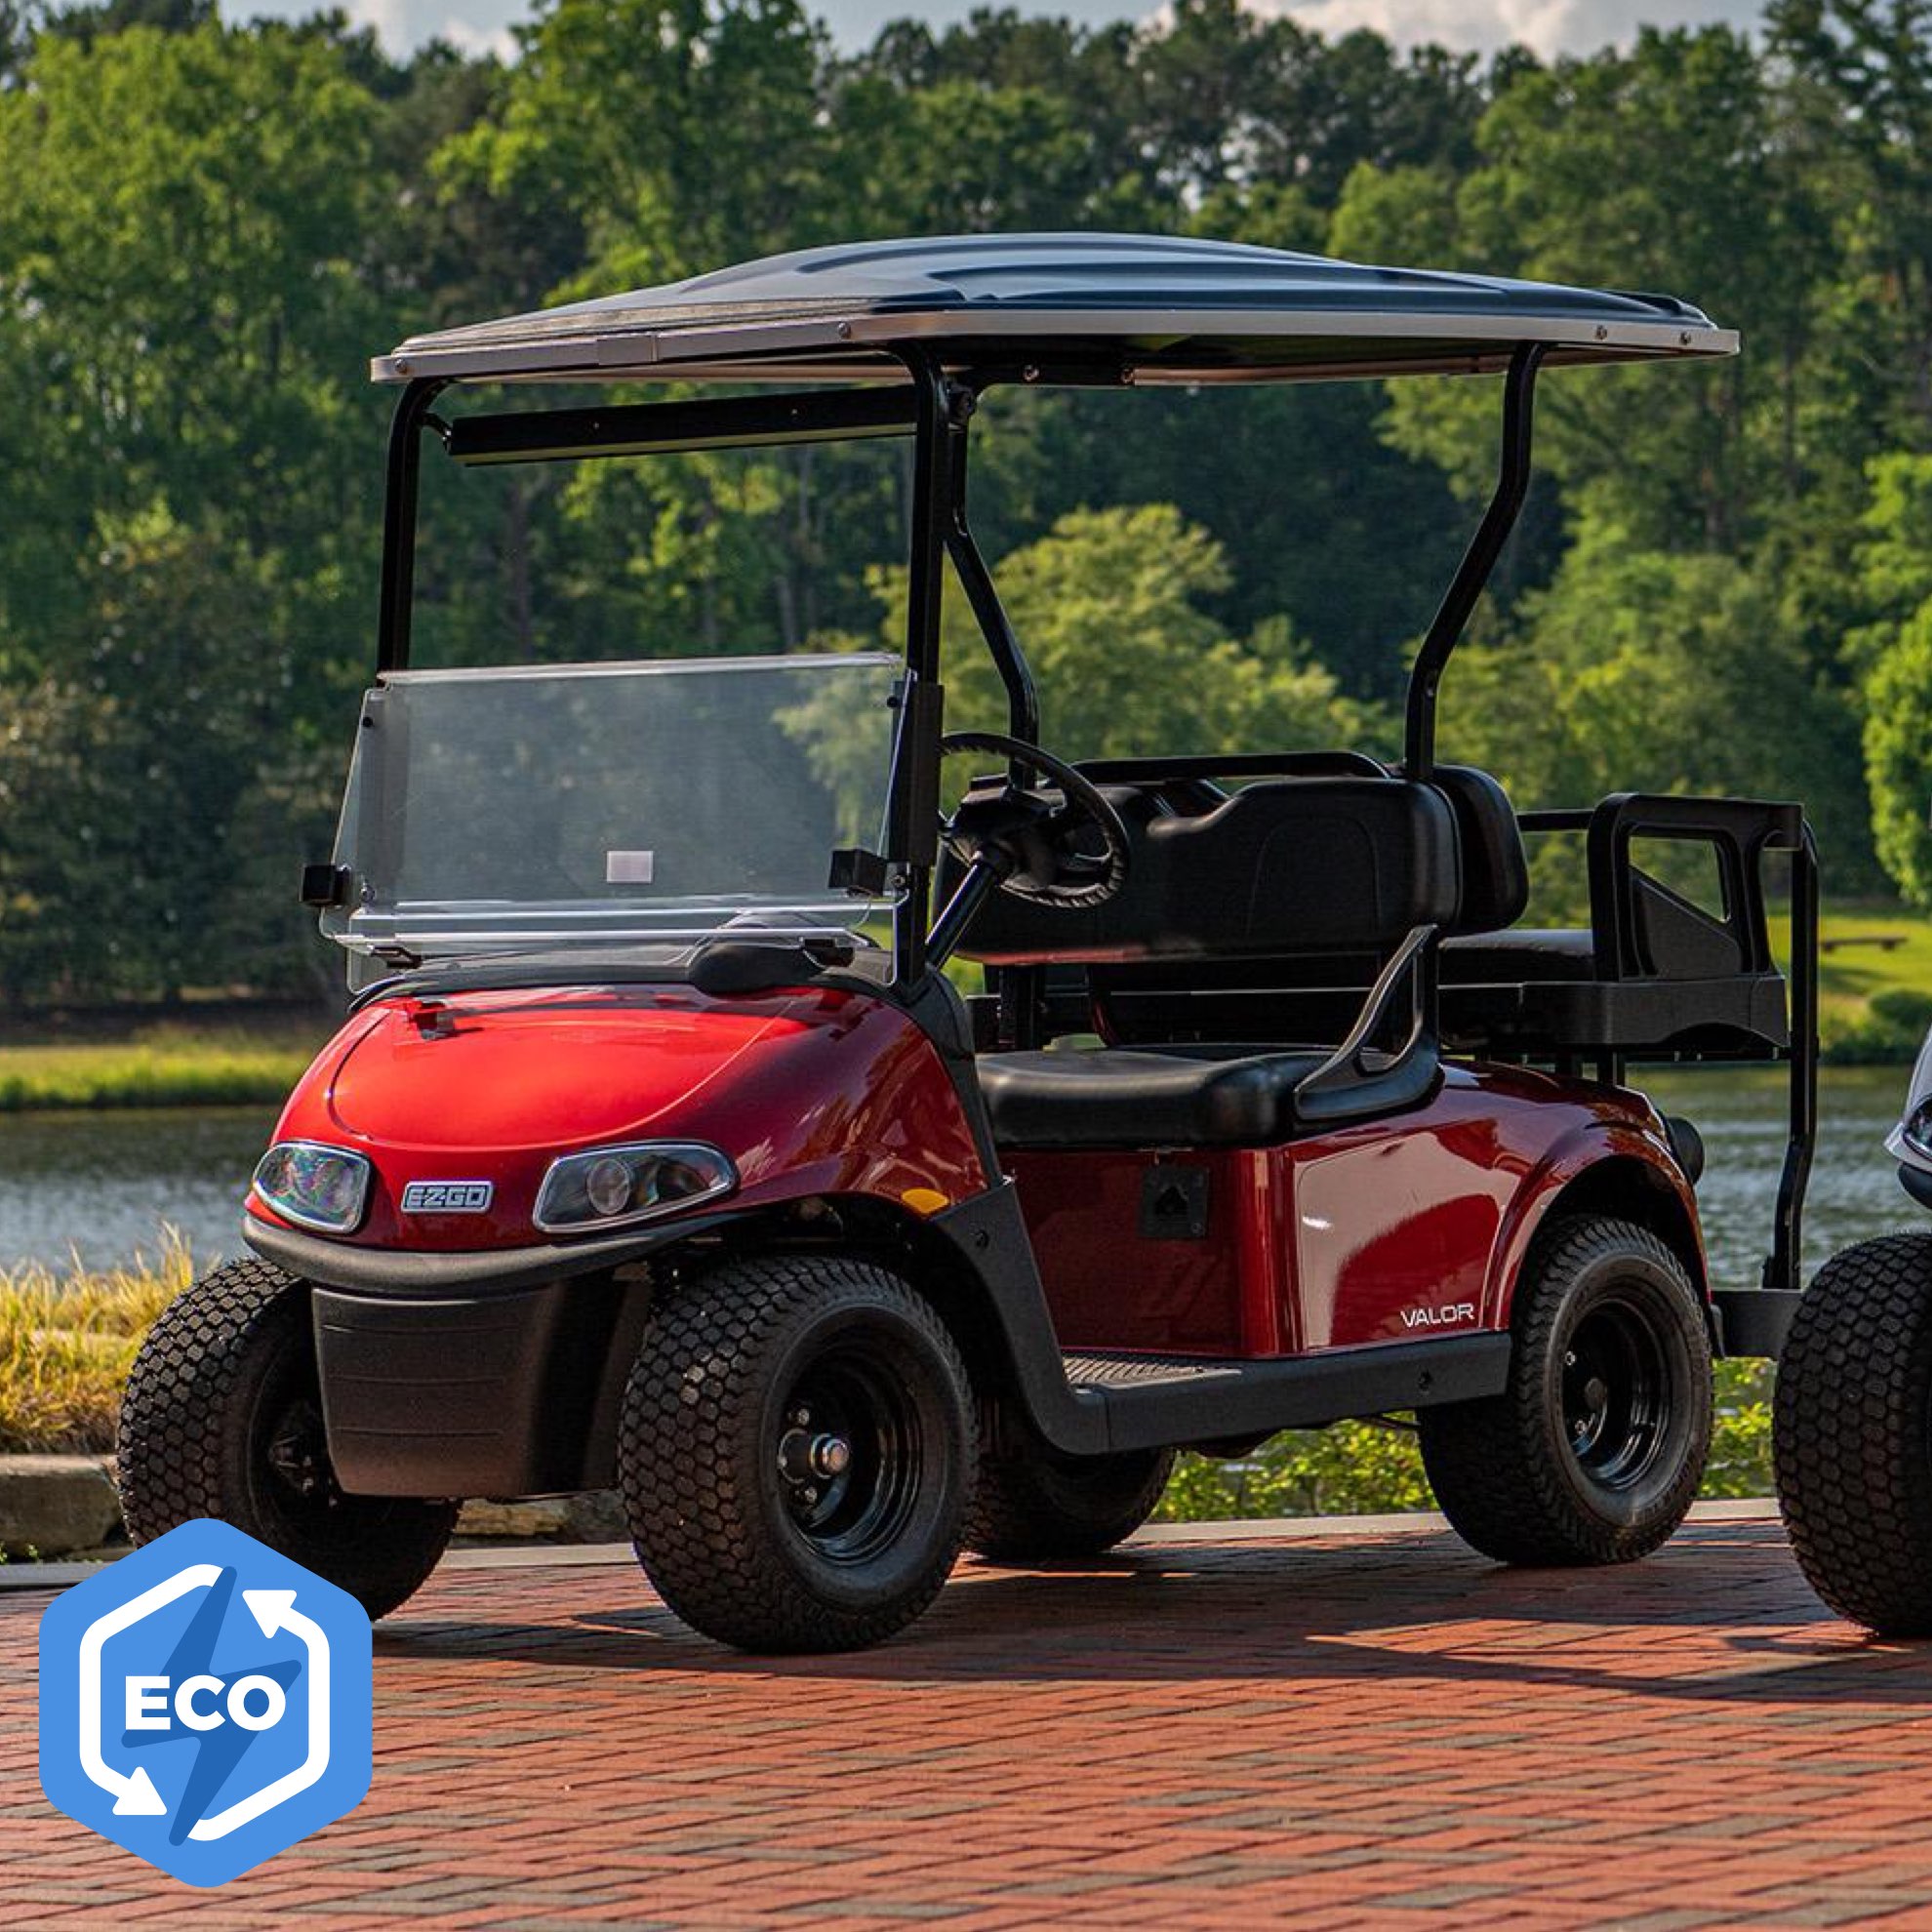 E-Z-GO Valor 4 People Carrier Buggy